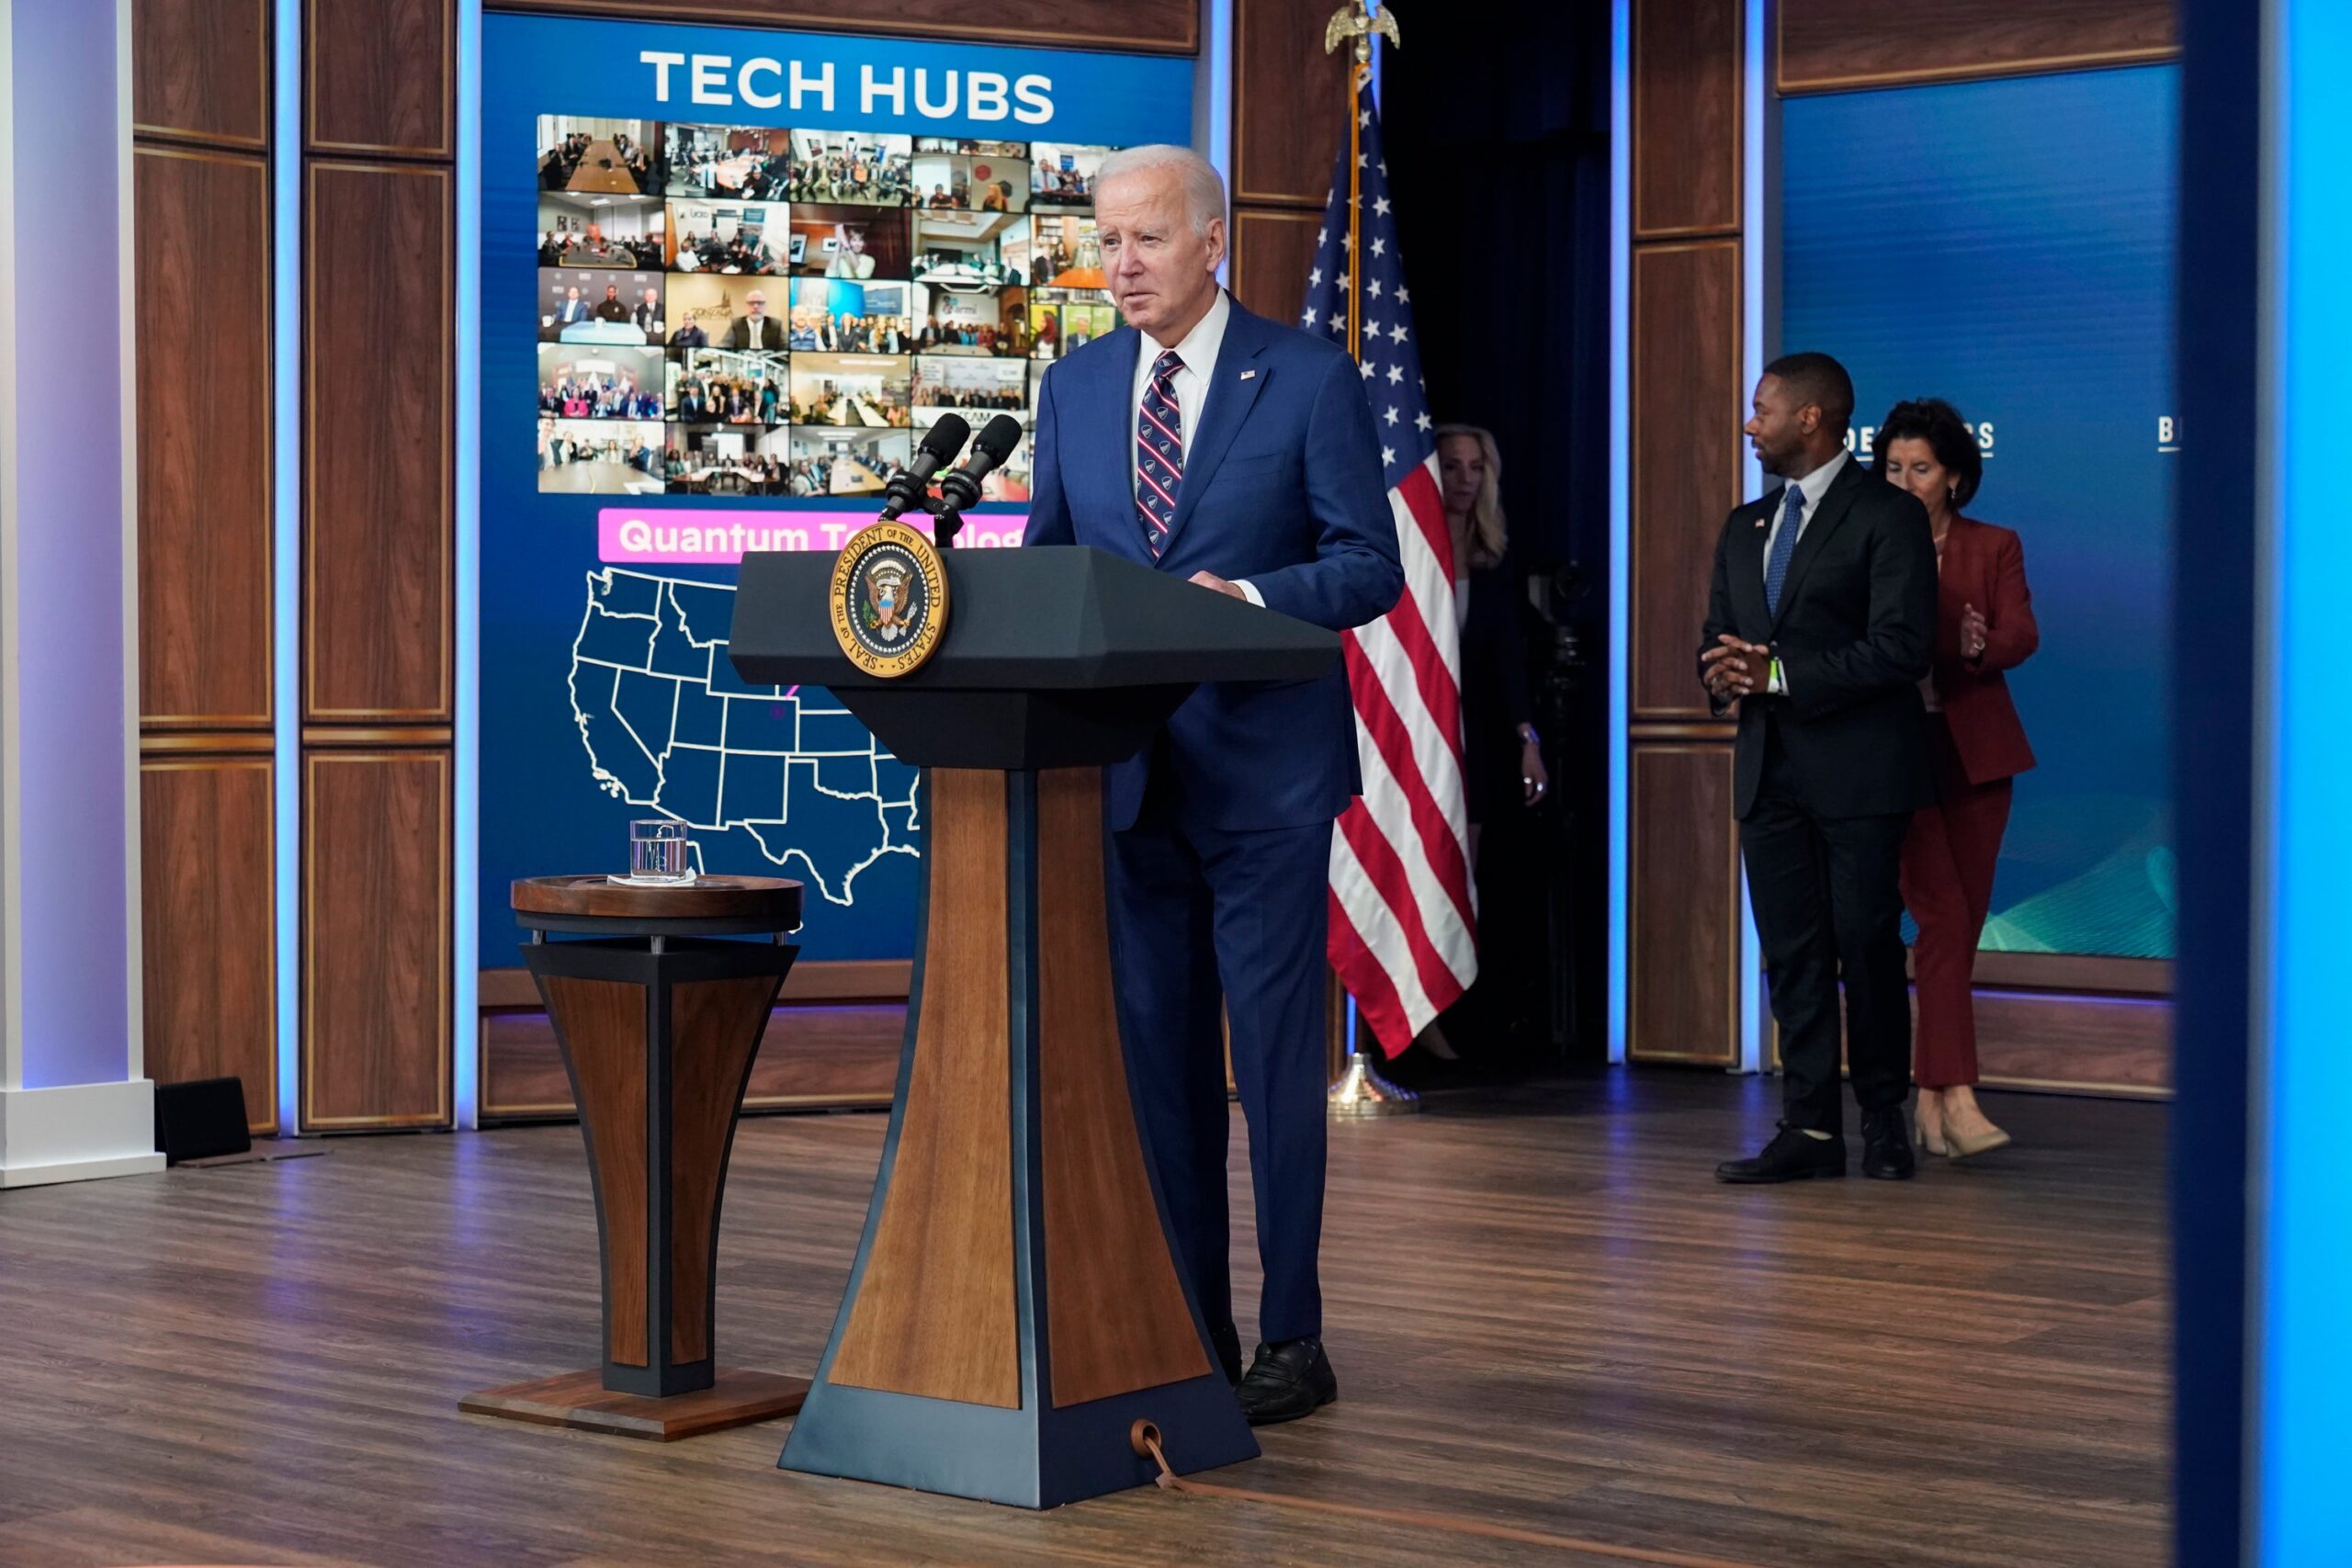 President Joe Biden walks to the podium during an event on the economy in the South Court Auditorium of the Eisenhower Executive Office Building on the White House complex